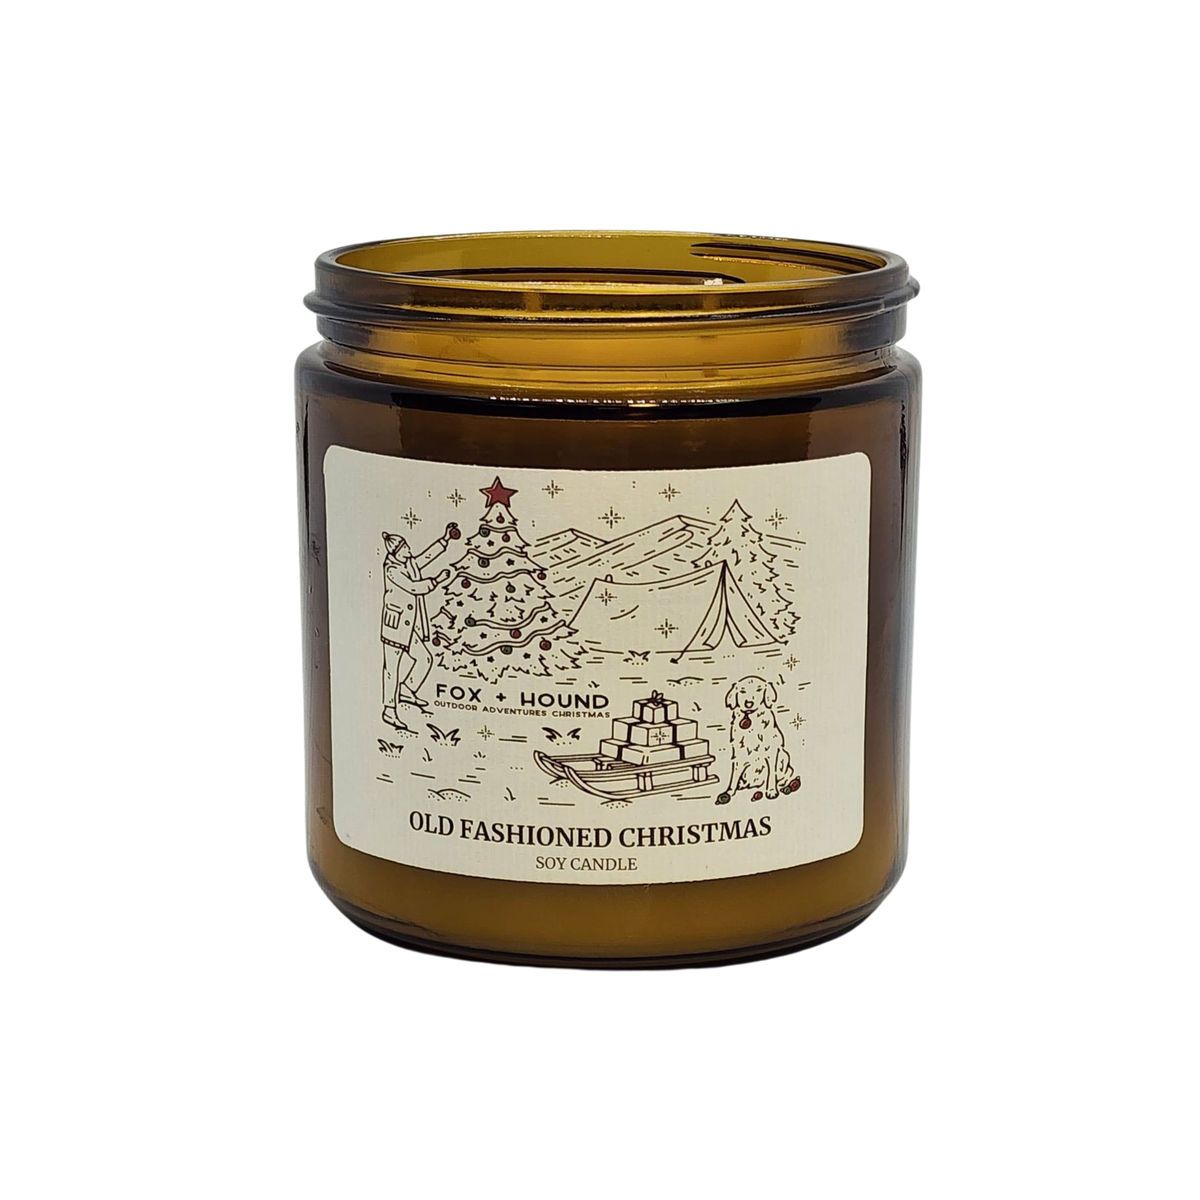 Fox + Hound Odor Eliminator - Old Fashioned Christmas Candle